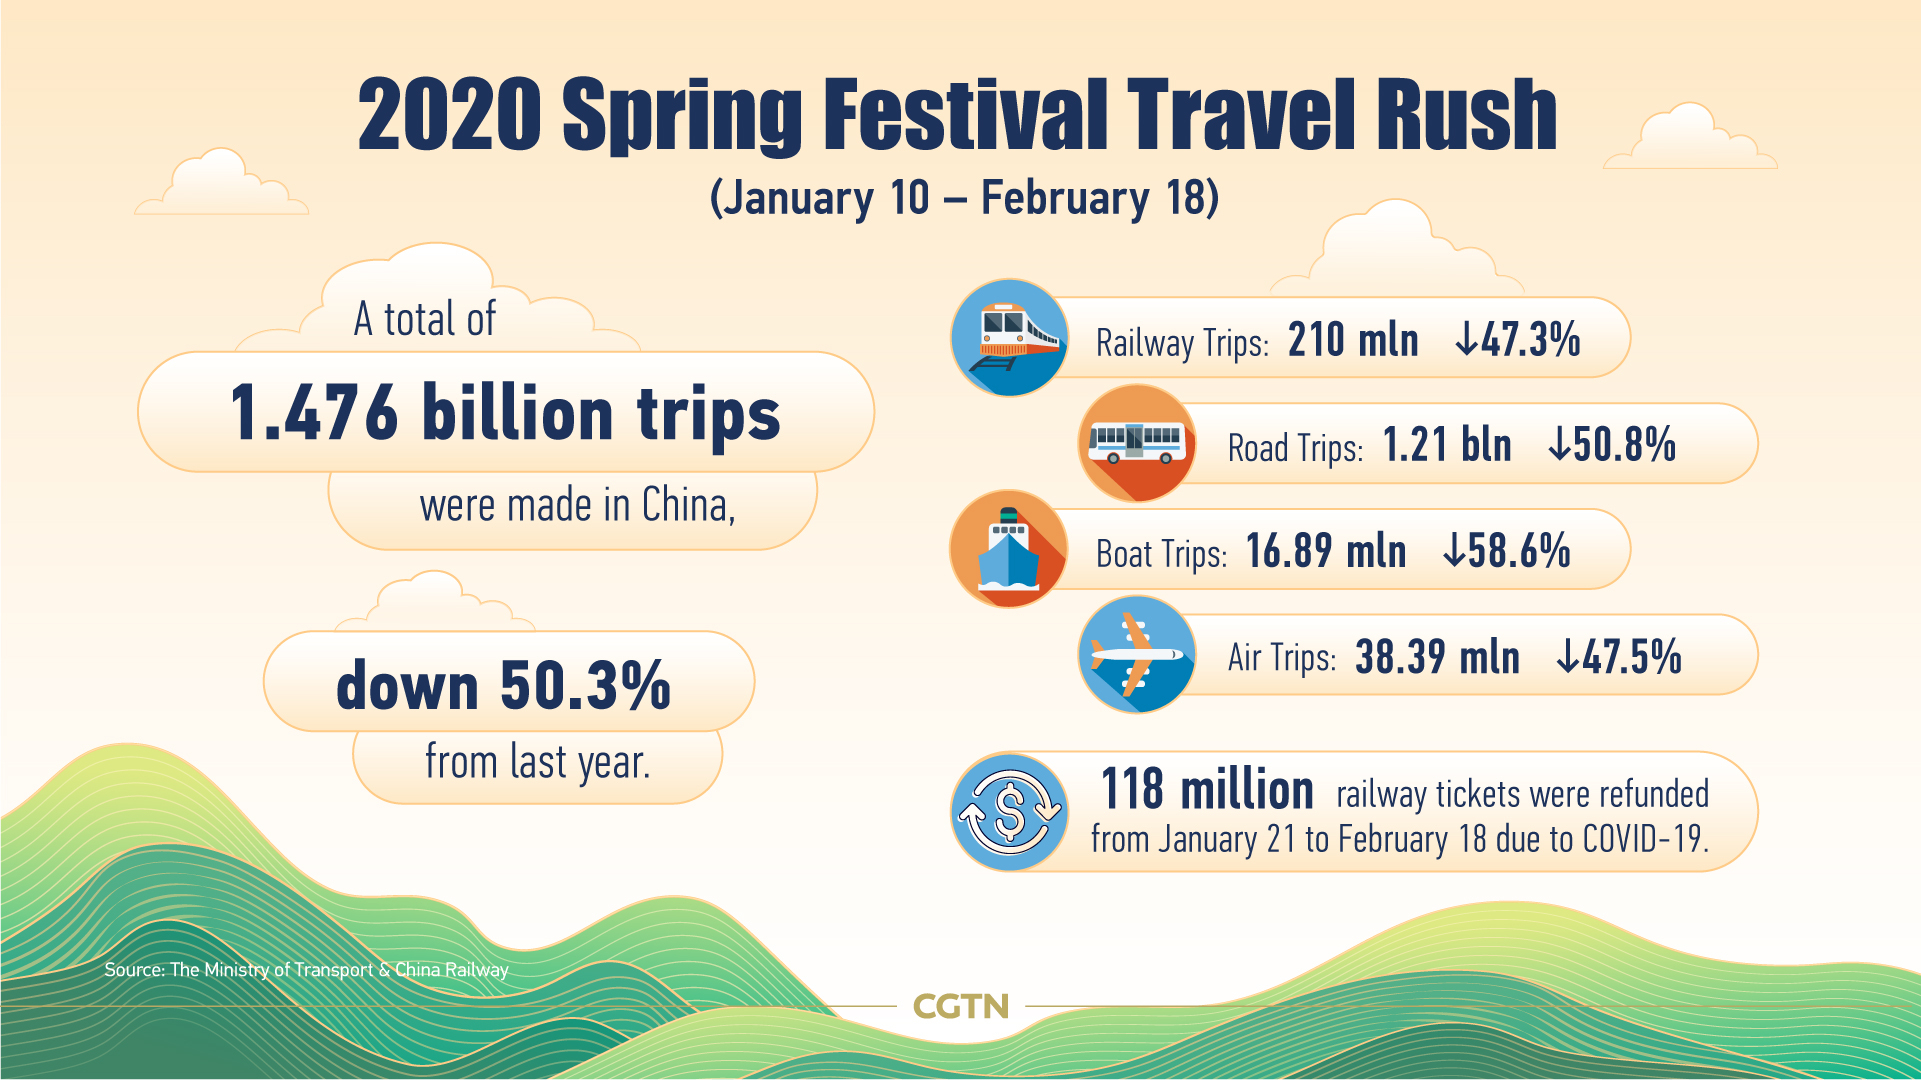 2020 Spring Festival travel rush in numbers CGTN